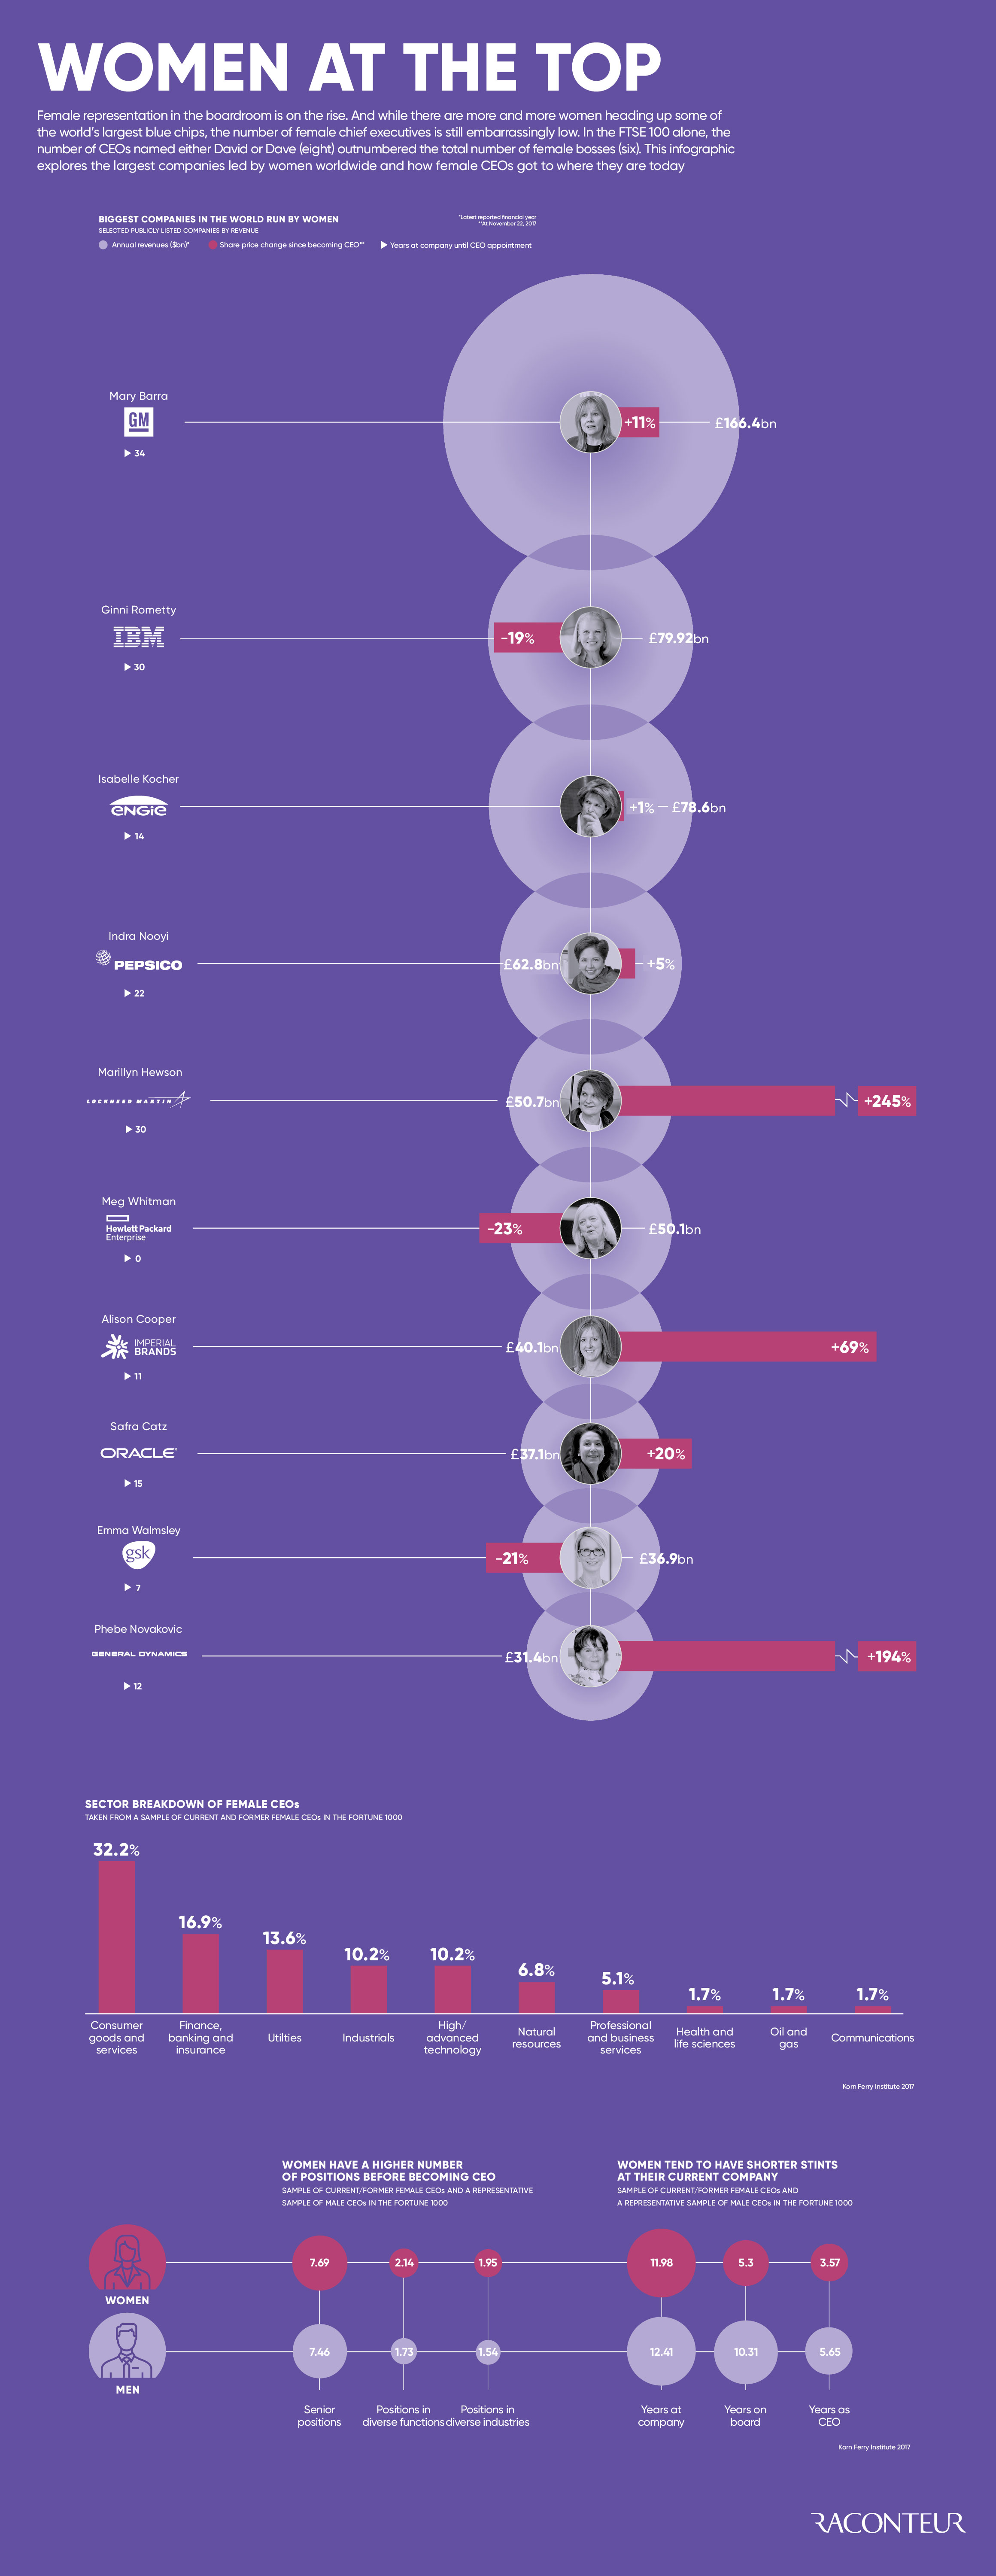 Women at the top infographic